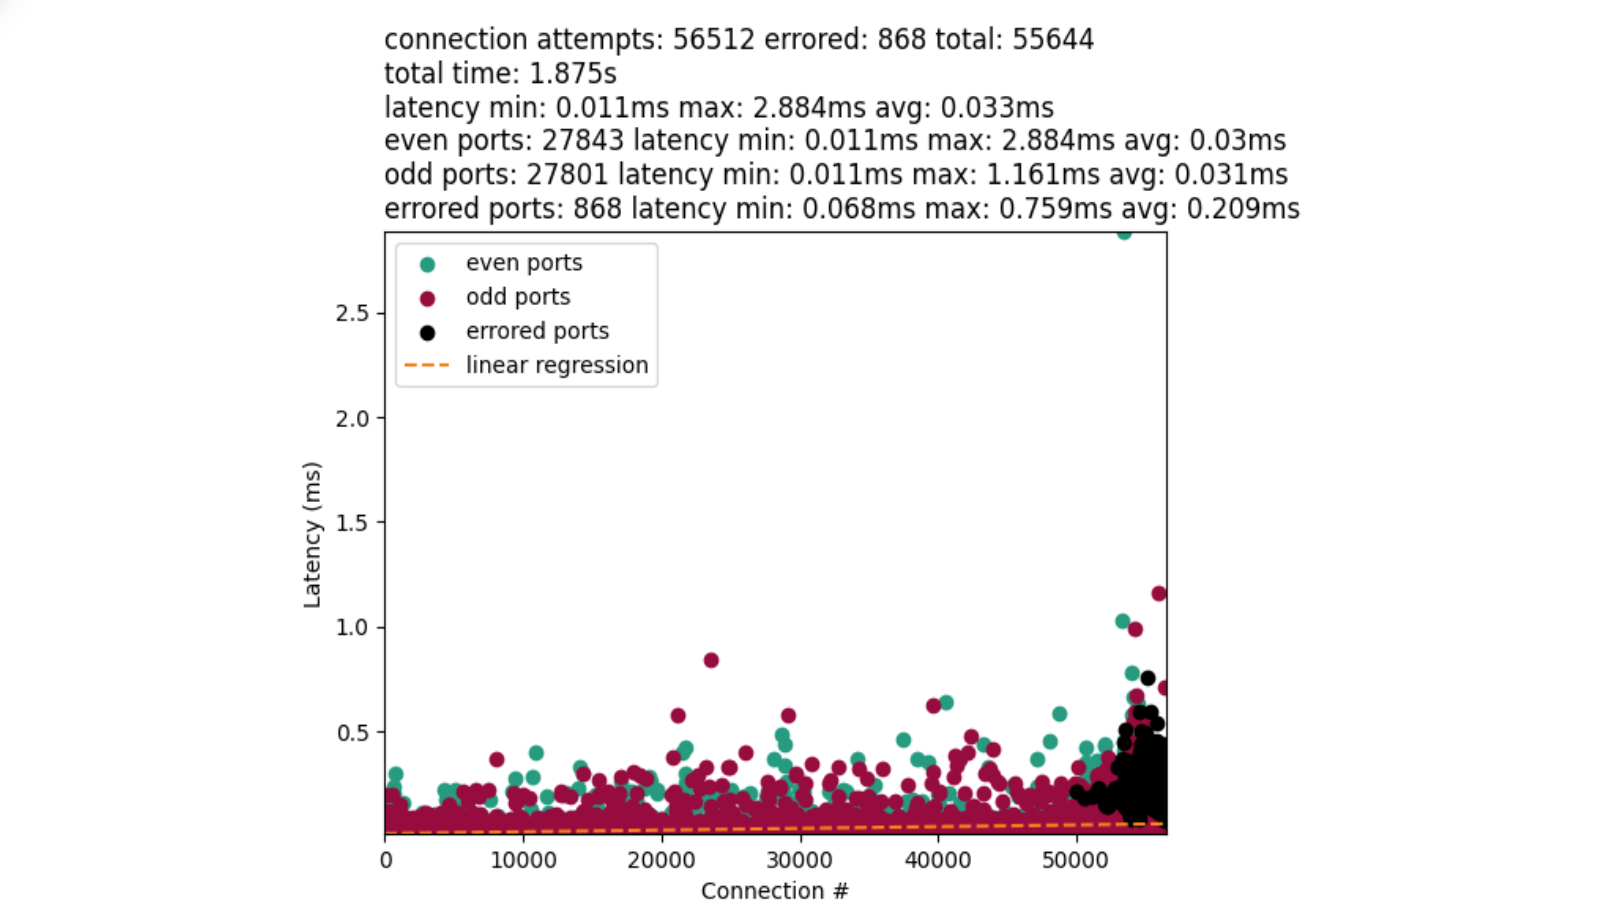 Figure 7: A detailed chart representing a flatter-linear distribution of port-finding speeds. Out of 56,512 connections the average time spent finding an even port is 0.03 milliseconds while we see 0.031 milliseconds on average for odd ports. There are 868 connections that resulted in an error.